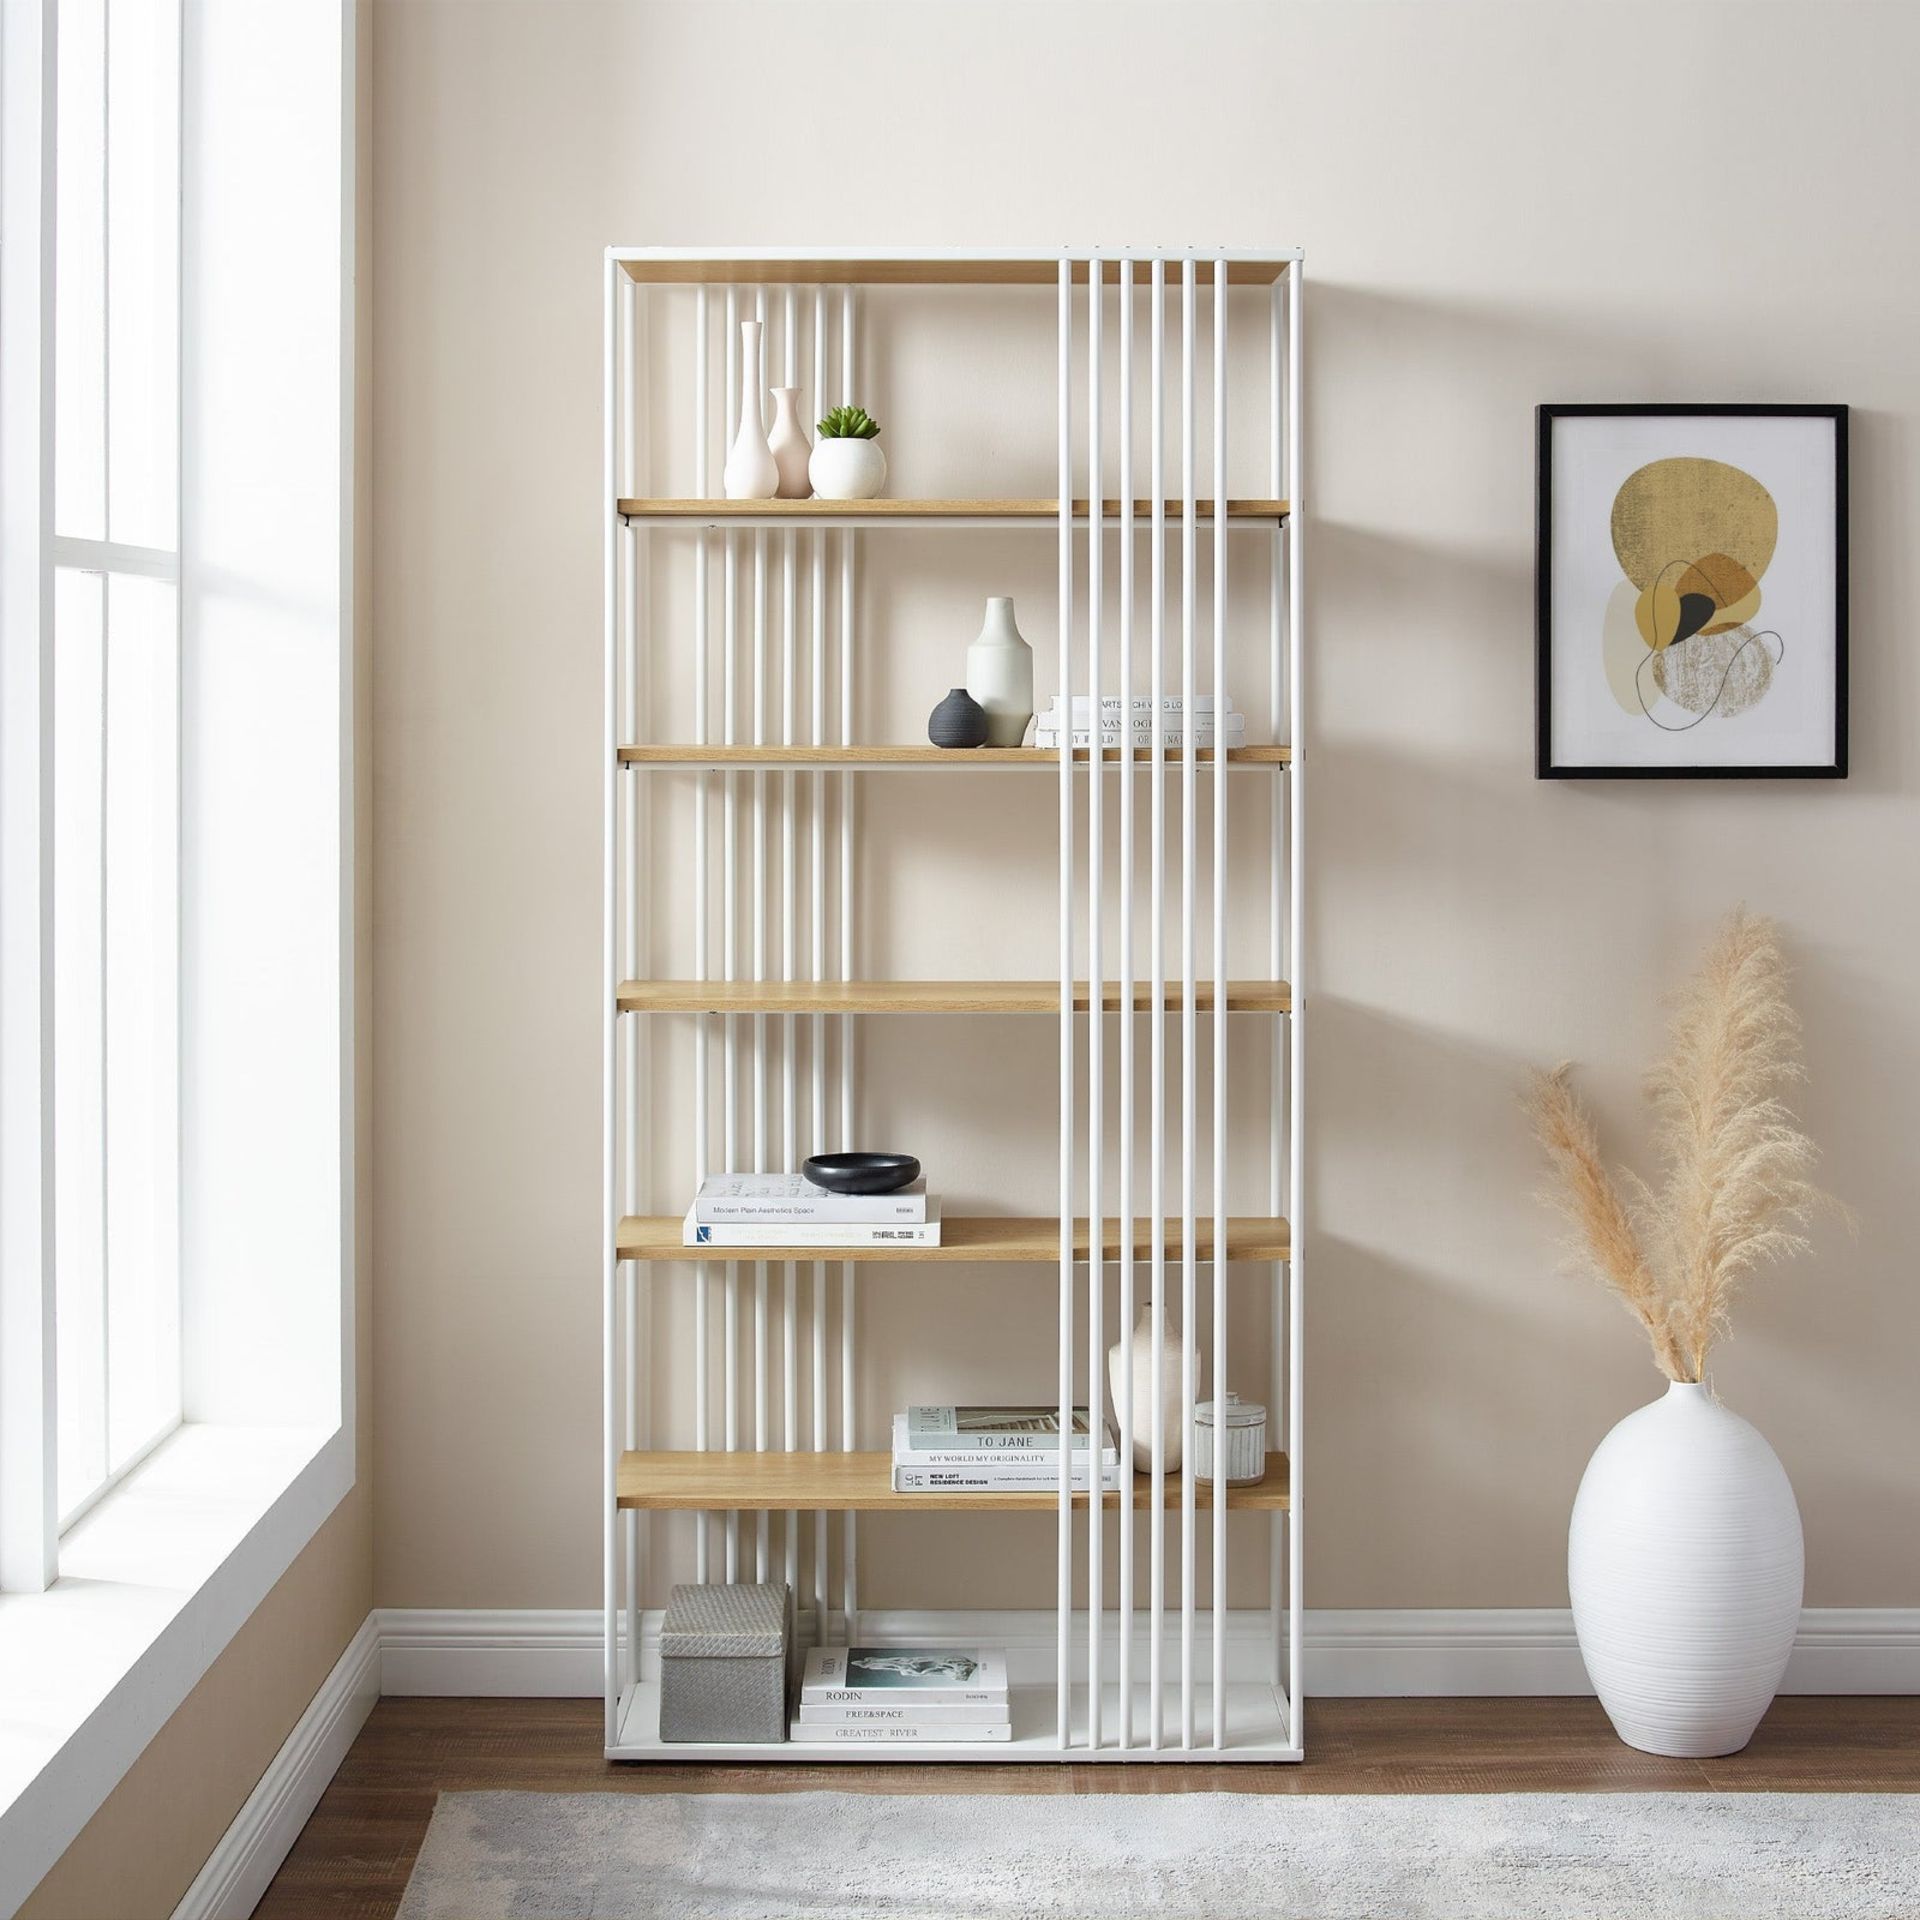 MIDDLEBROOK DESIGNS CONTEMPORARY OPEN SLAT BOOKCASE IN OAK/WHITE - RRP £425 - Image 2 of 3